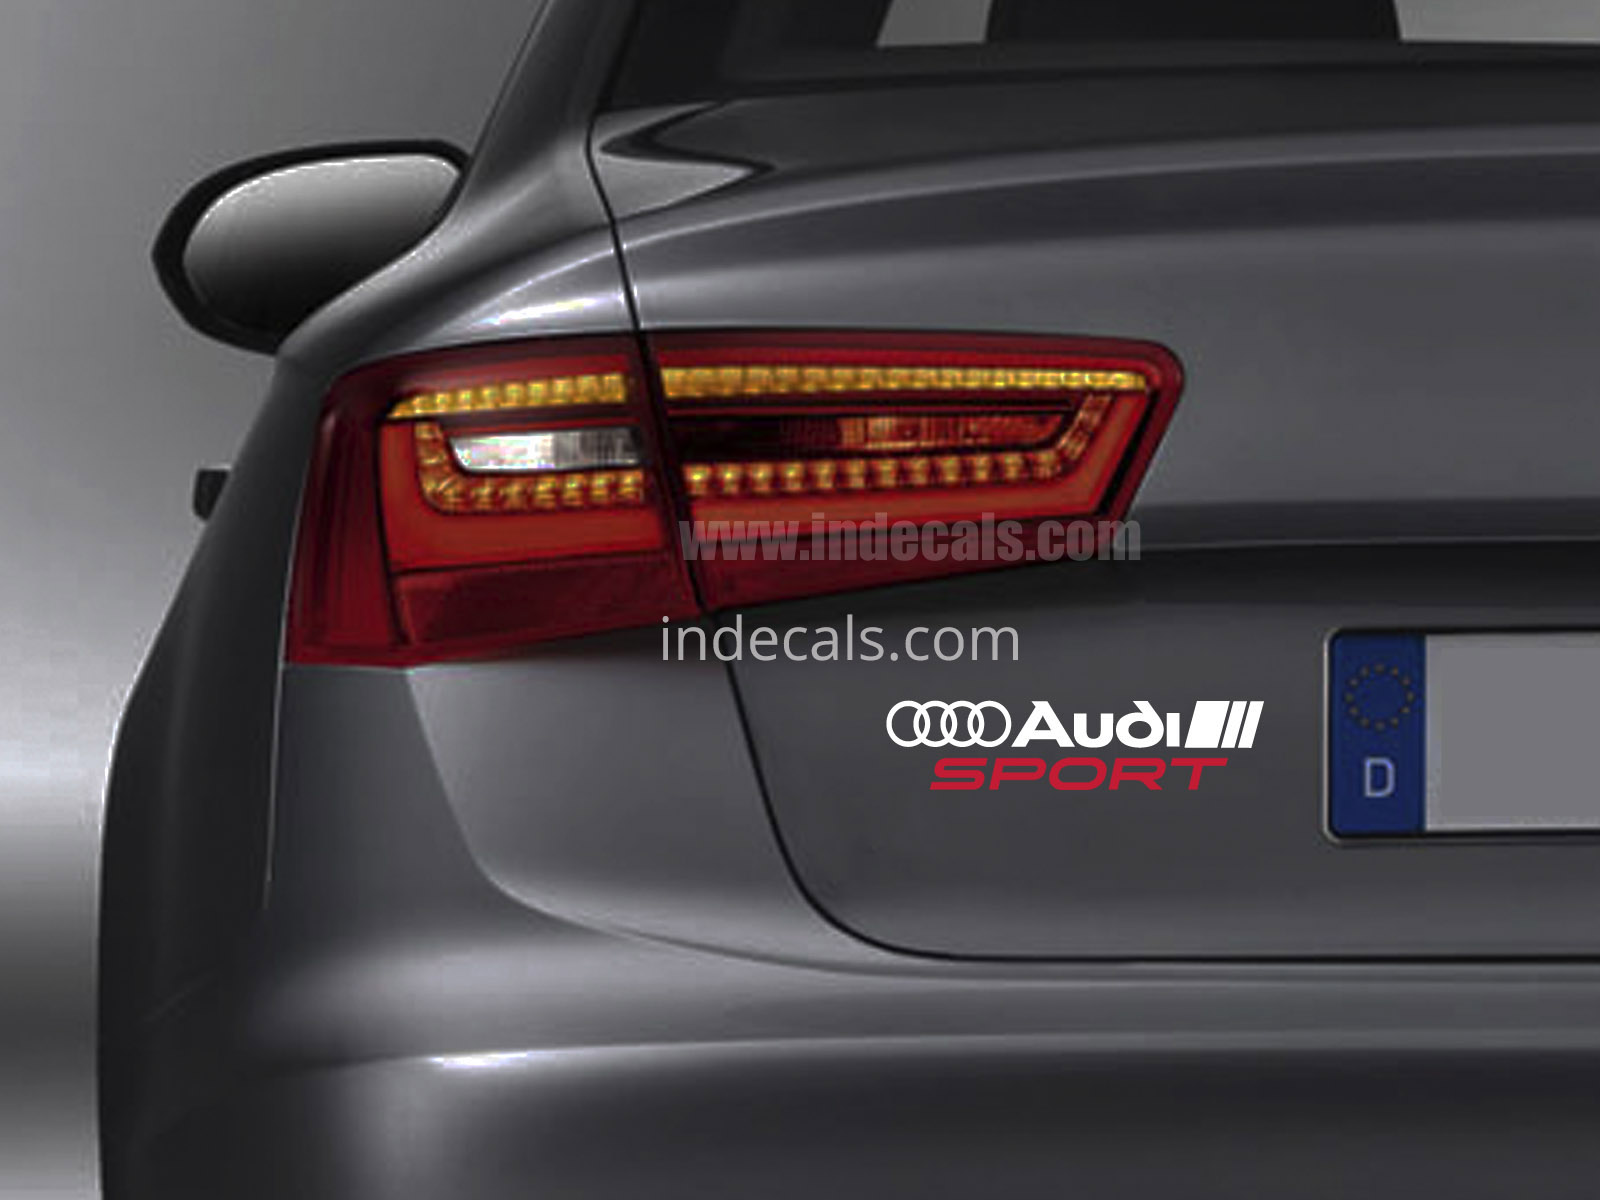 1 x Audi Sports Sticker for Trunk - White & Red